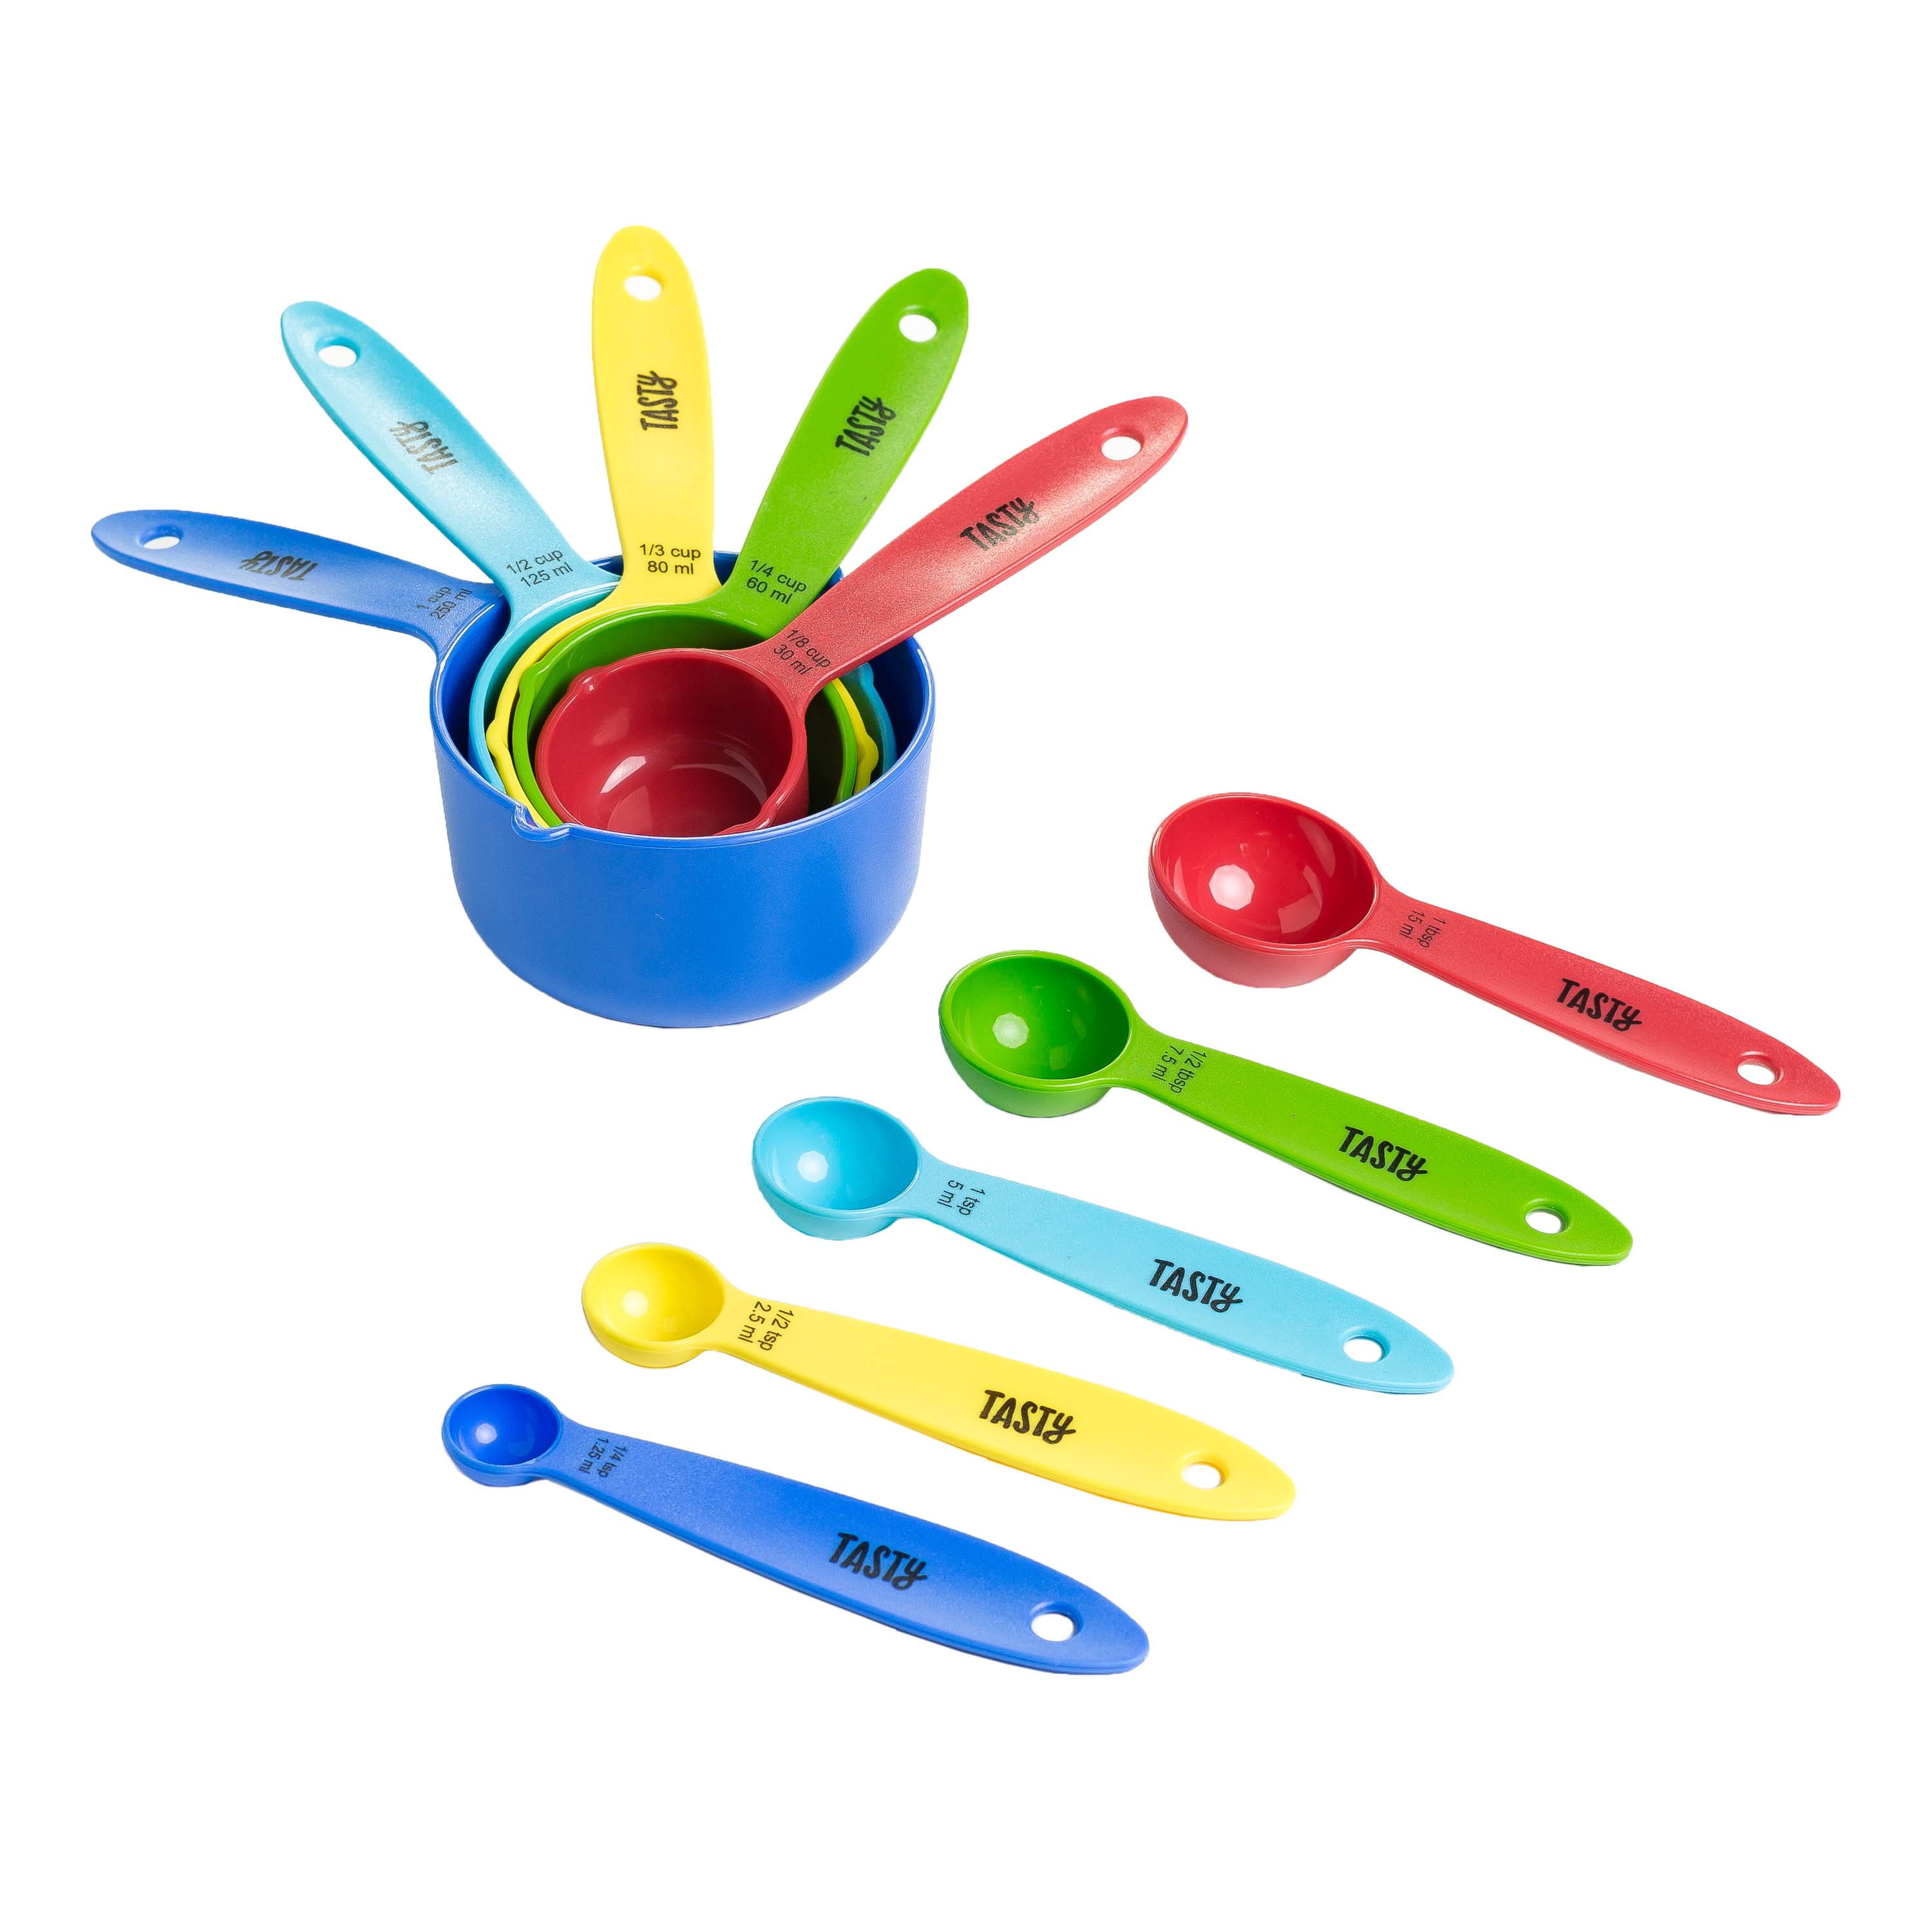 Measuring Cup and Spoon Set – The Convenient Kitchen